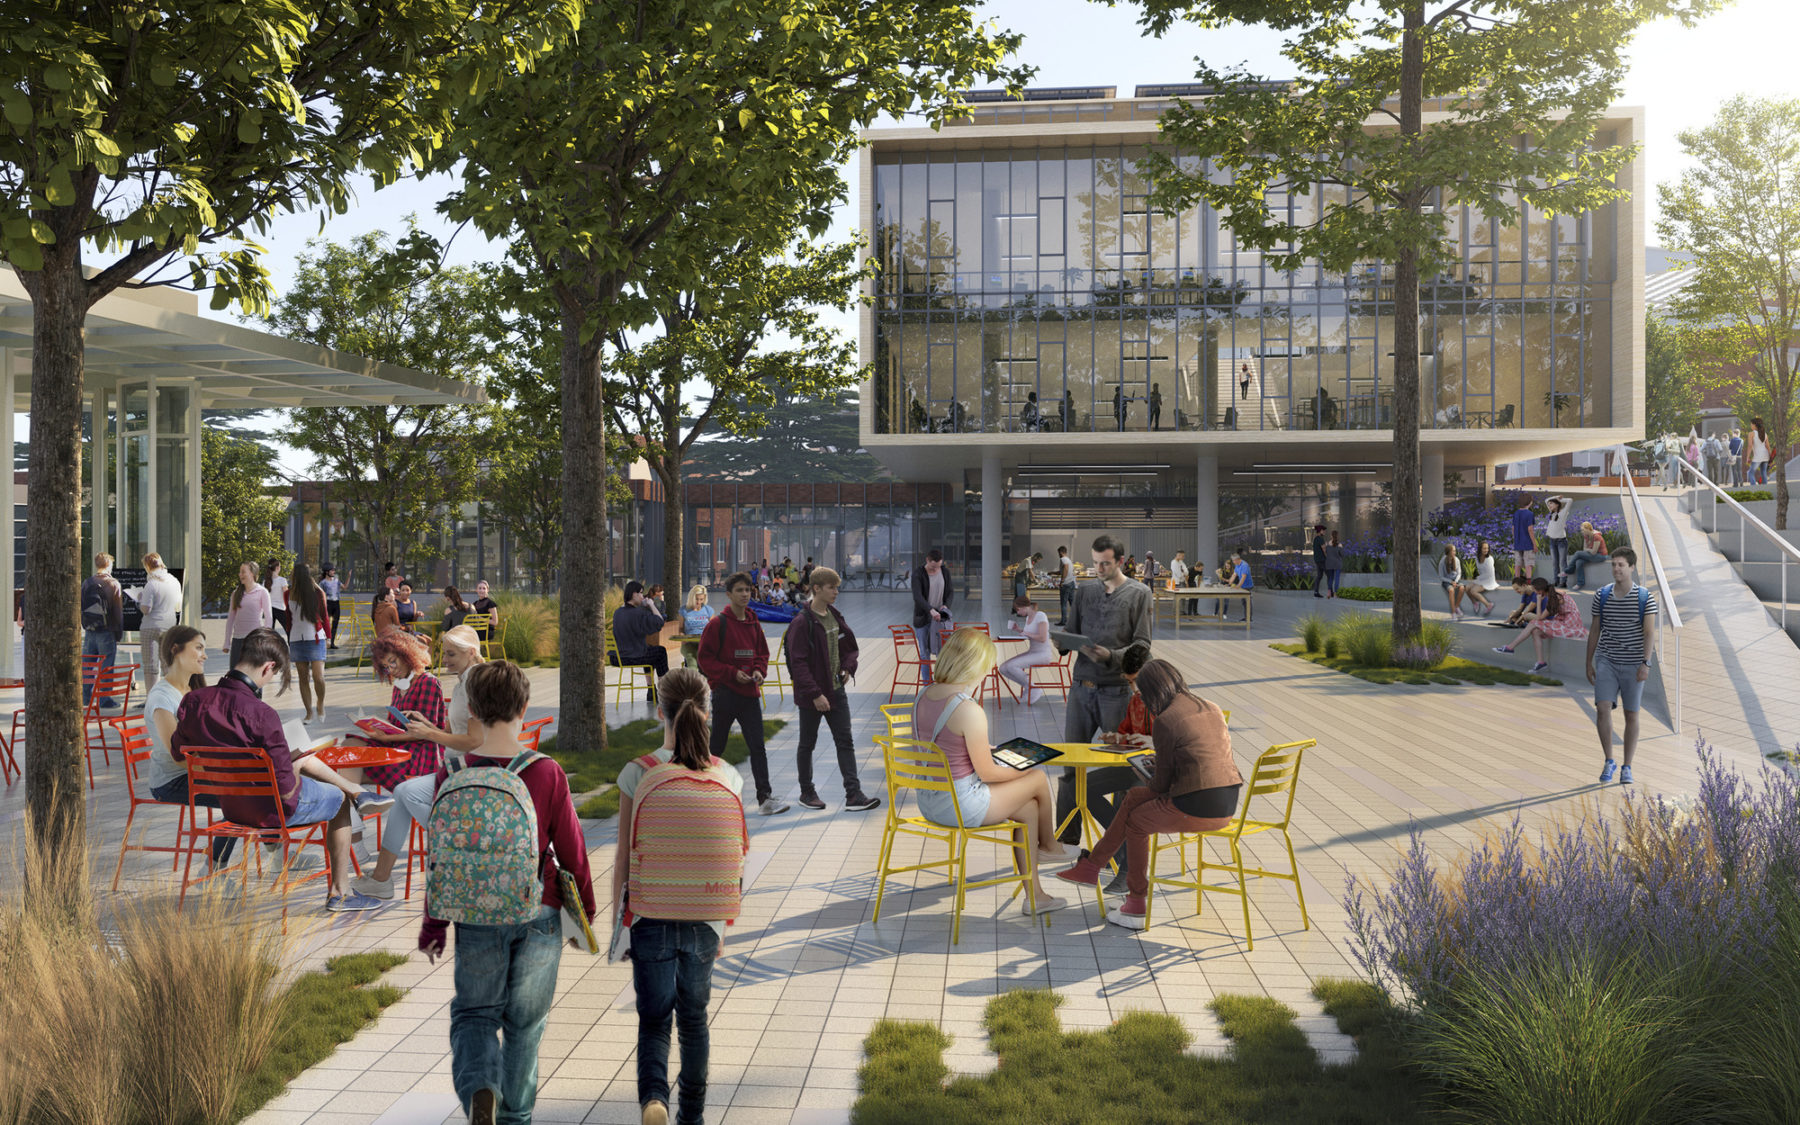 rendering of envisioned campus plaza. Groups of students sit at yellow and orange site furniture in foreground.